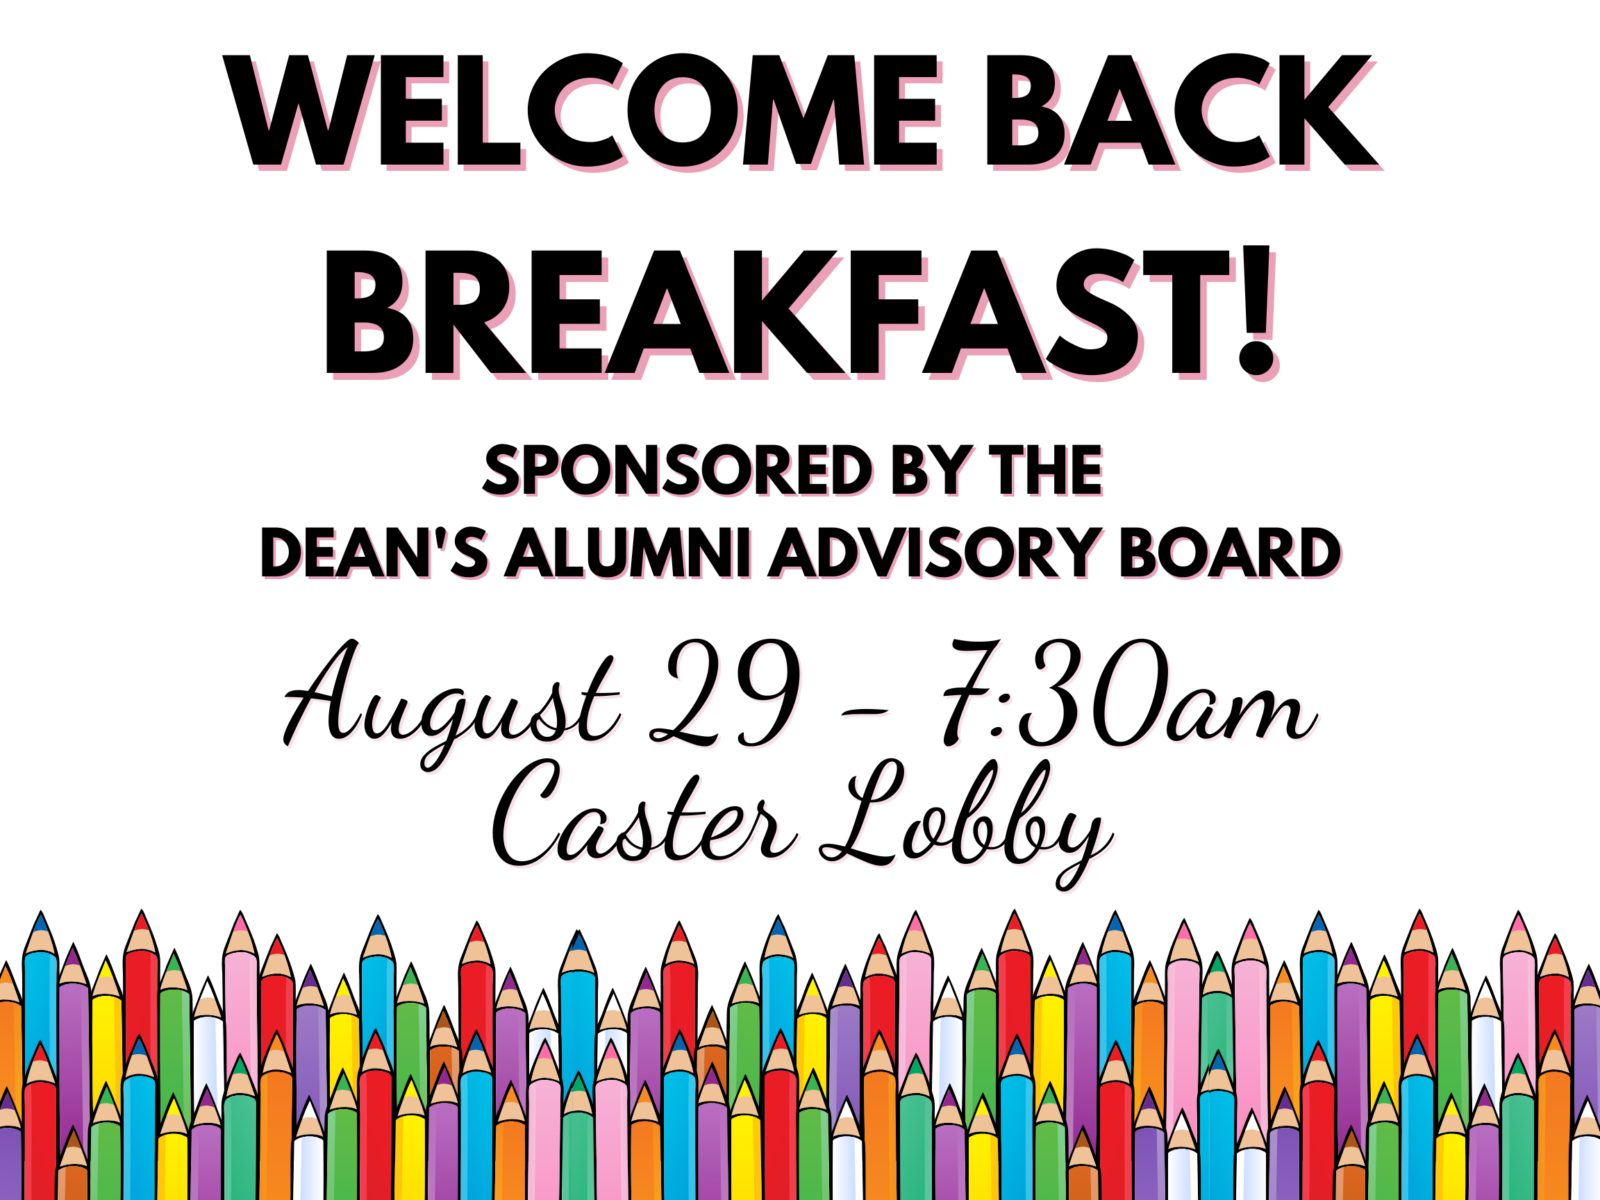 Welcome Back Breakfast, sponsored by the Dean's Alumni Advisory Board. August 29 at 7:30am in the Caster Lobby